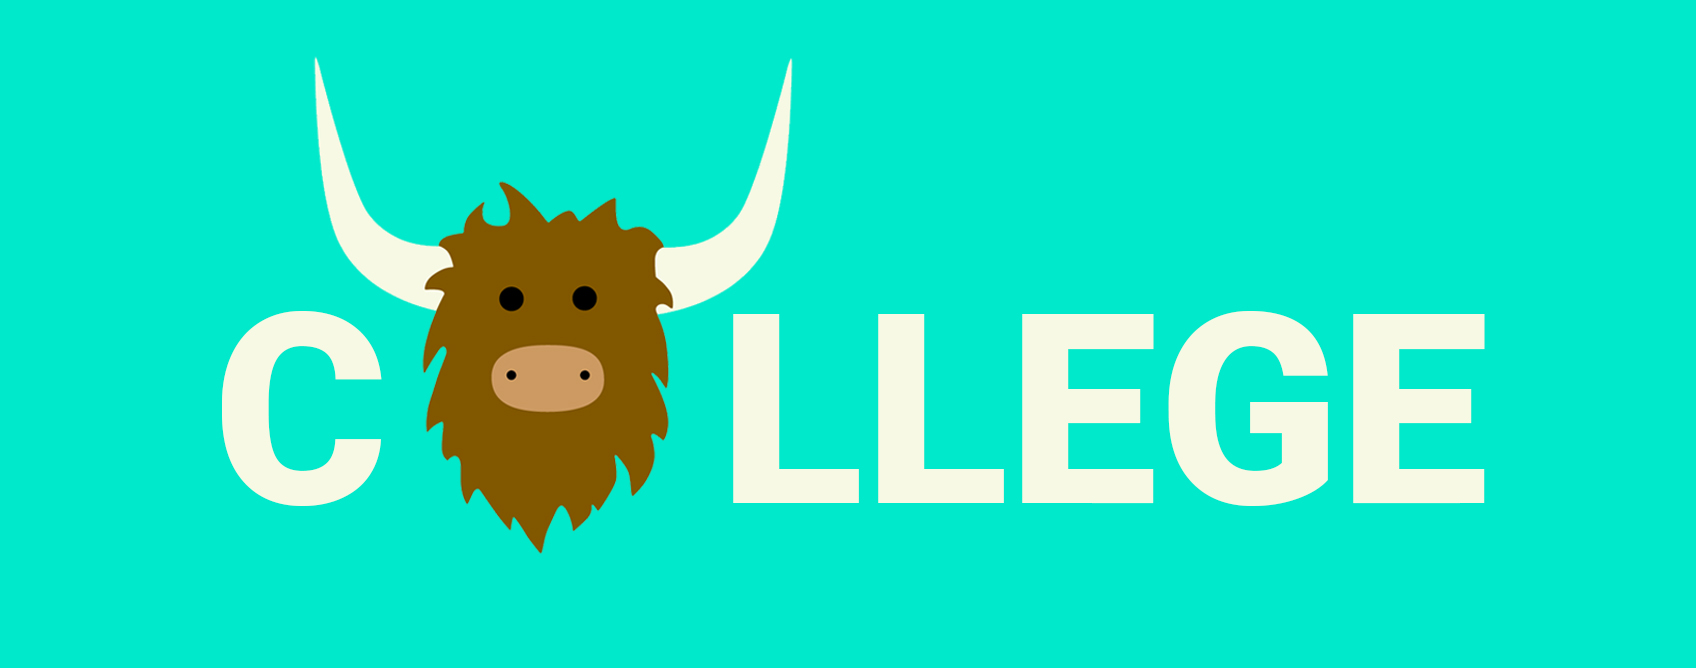 Can Yik Yak Evolve from Liability to Opportunity For Universities?